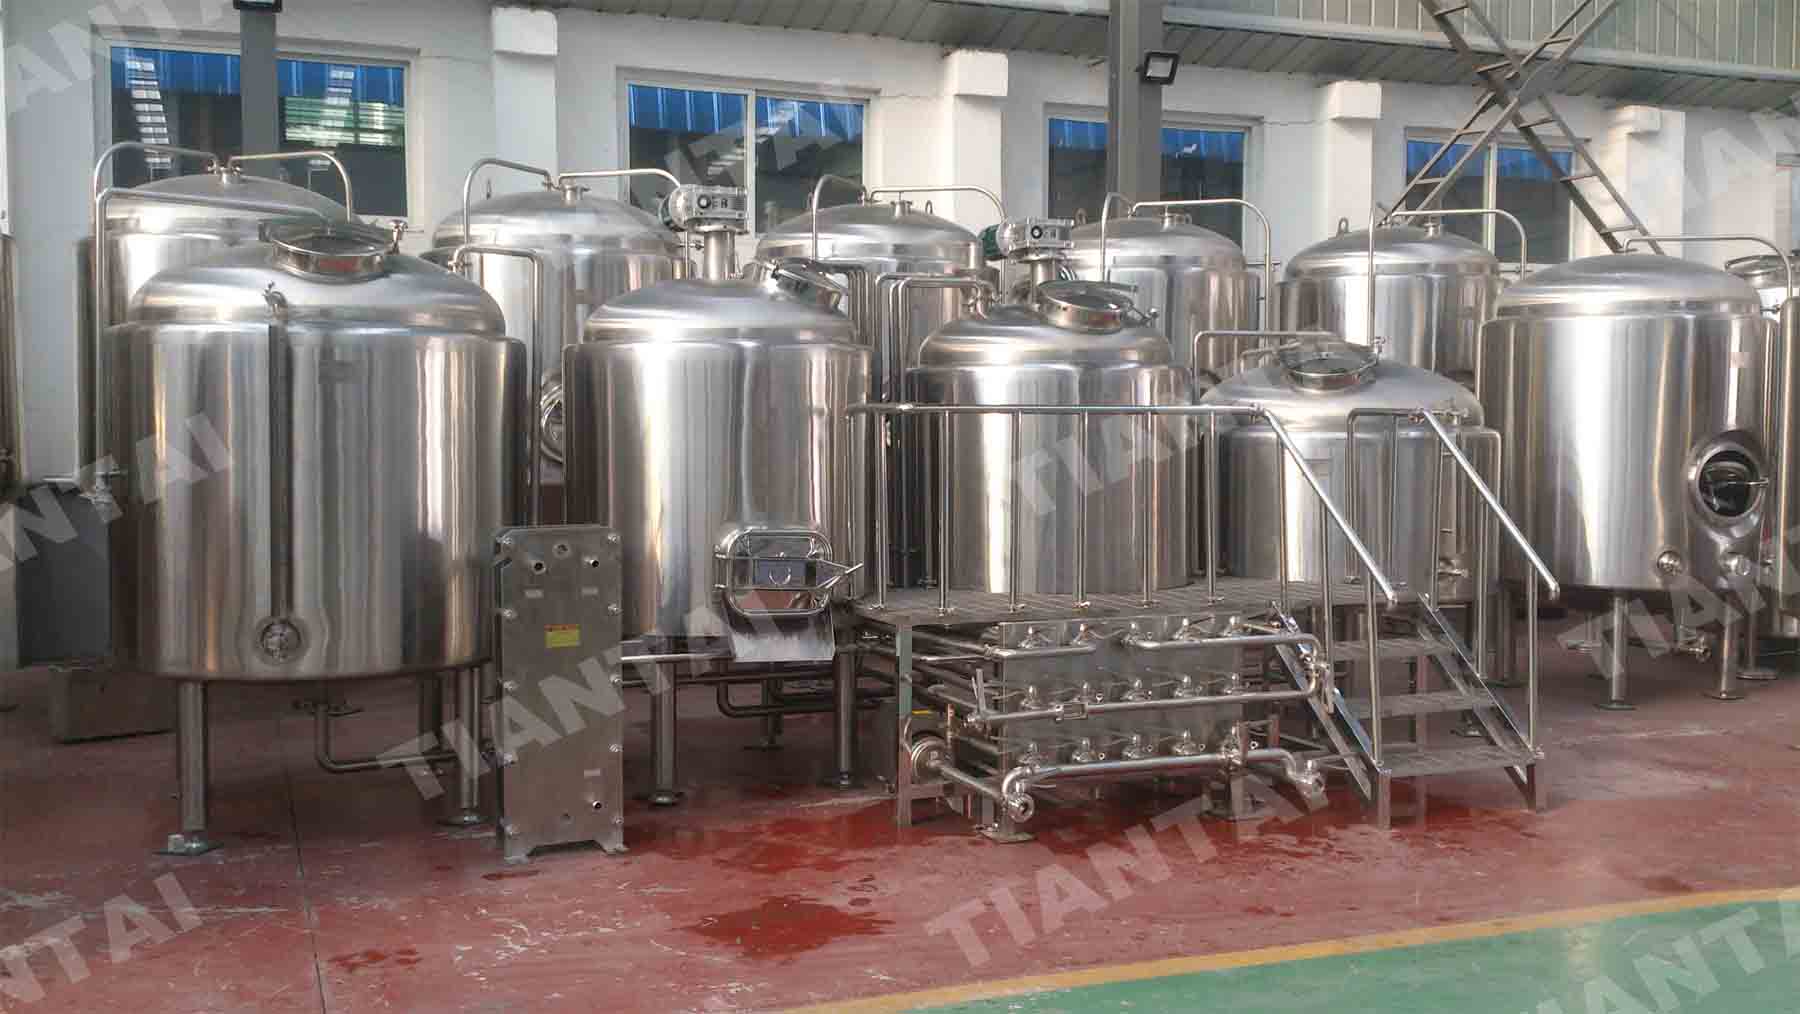 Turnkey 1500L steam beer brewery system